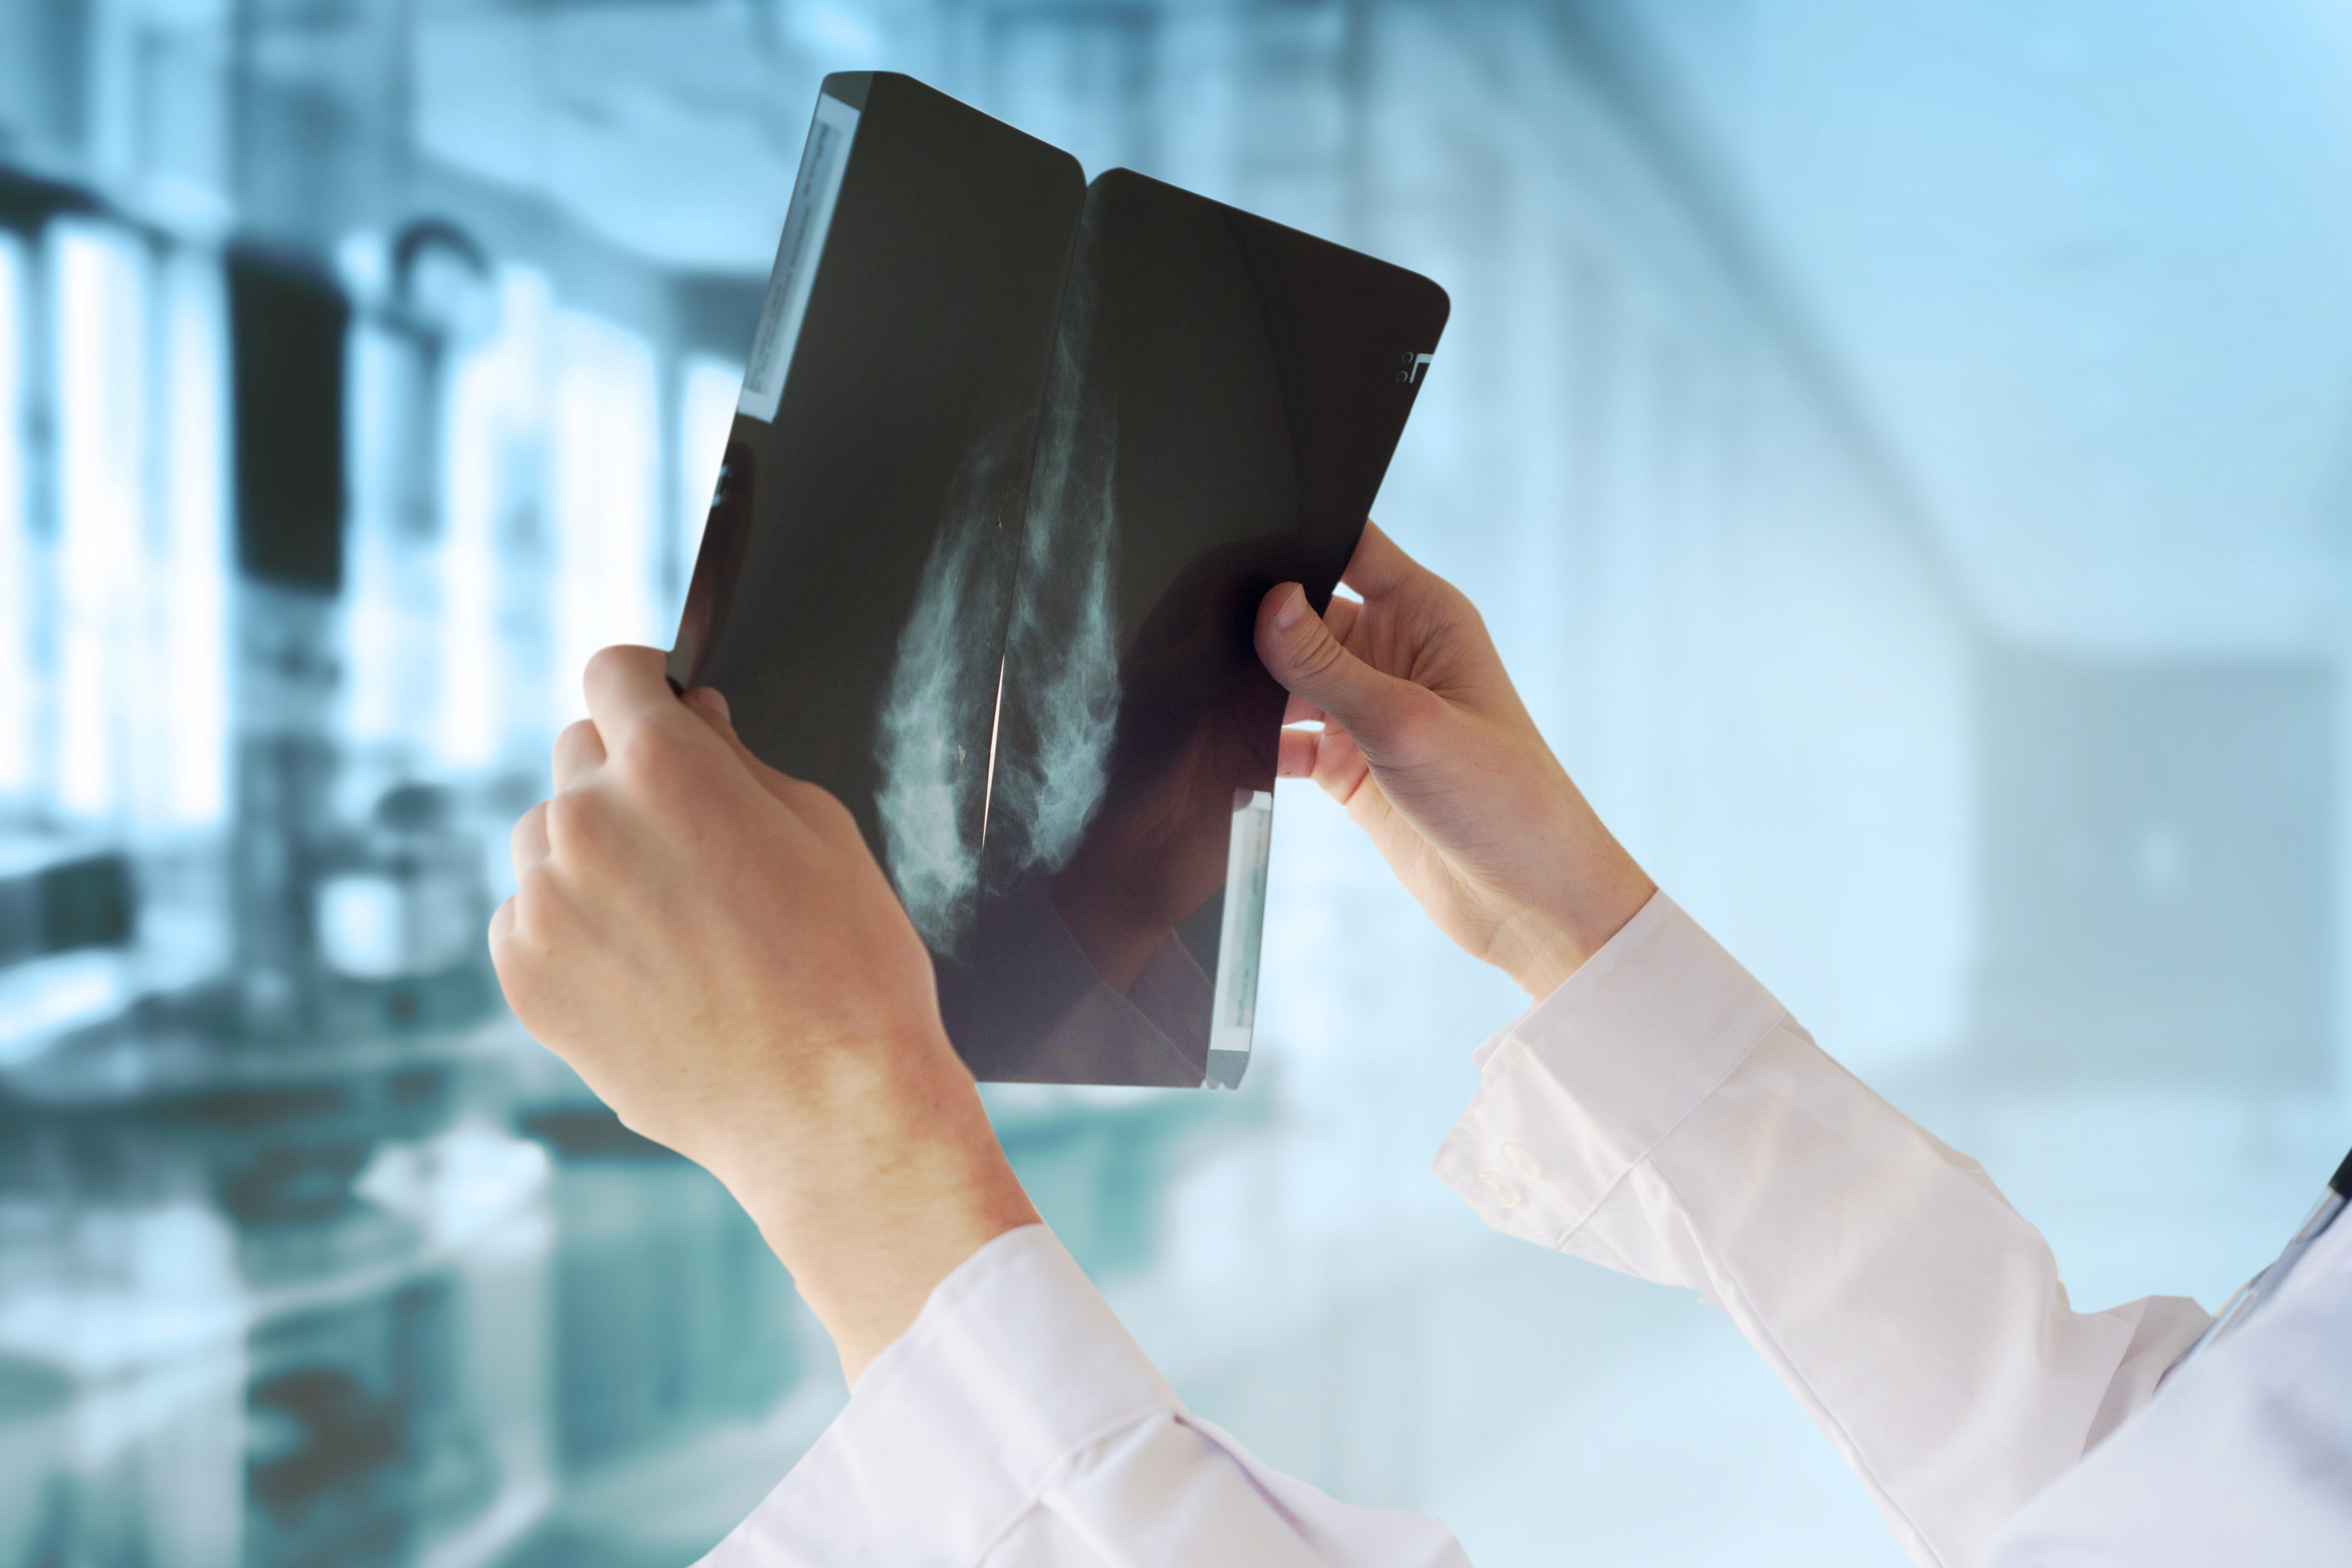 A doctor examines a mammogram to check for signs of breast cancer. Every woman in Hong Kong in an at-risk age group should get screened. Photo: Shutterstock